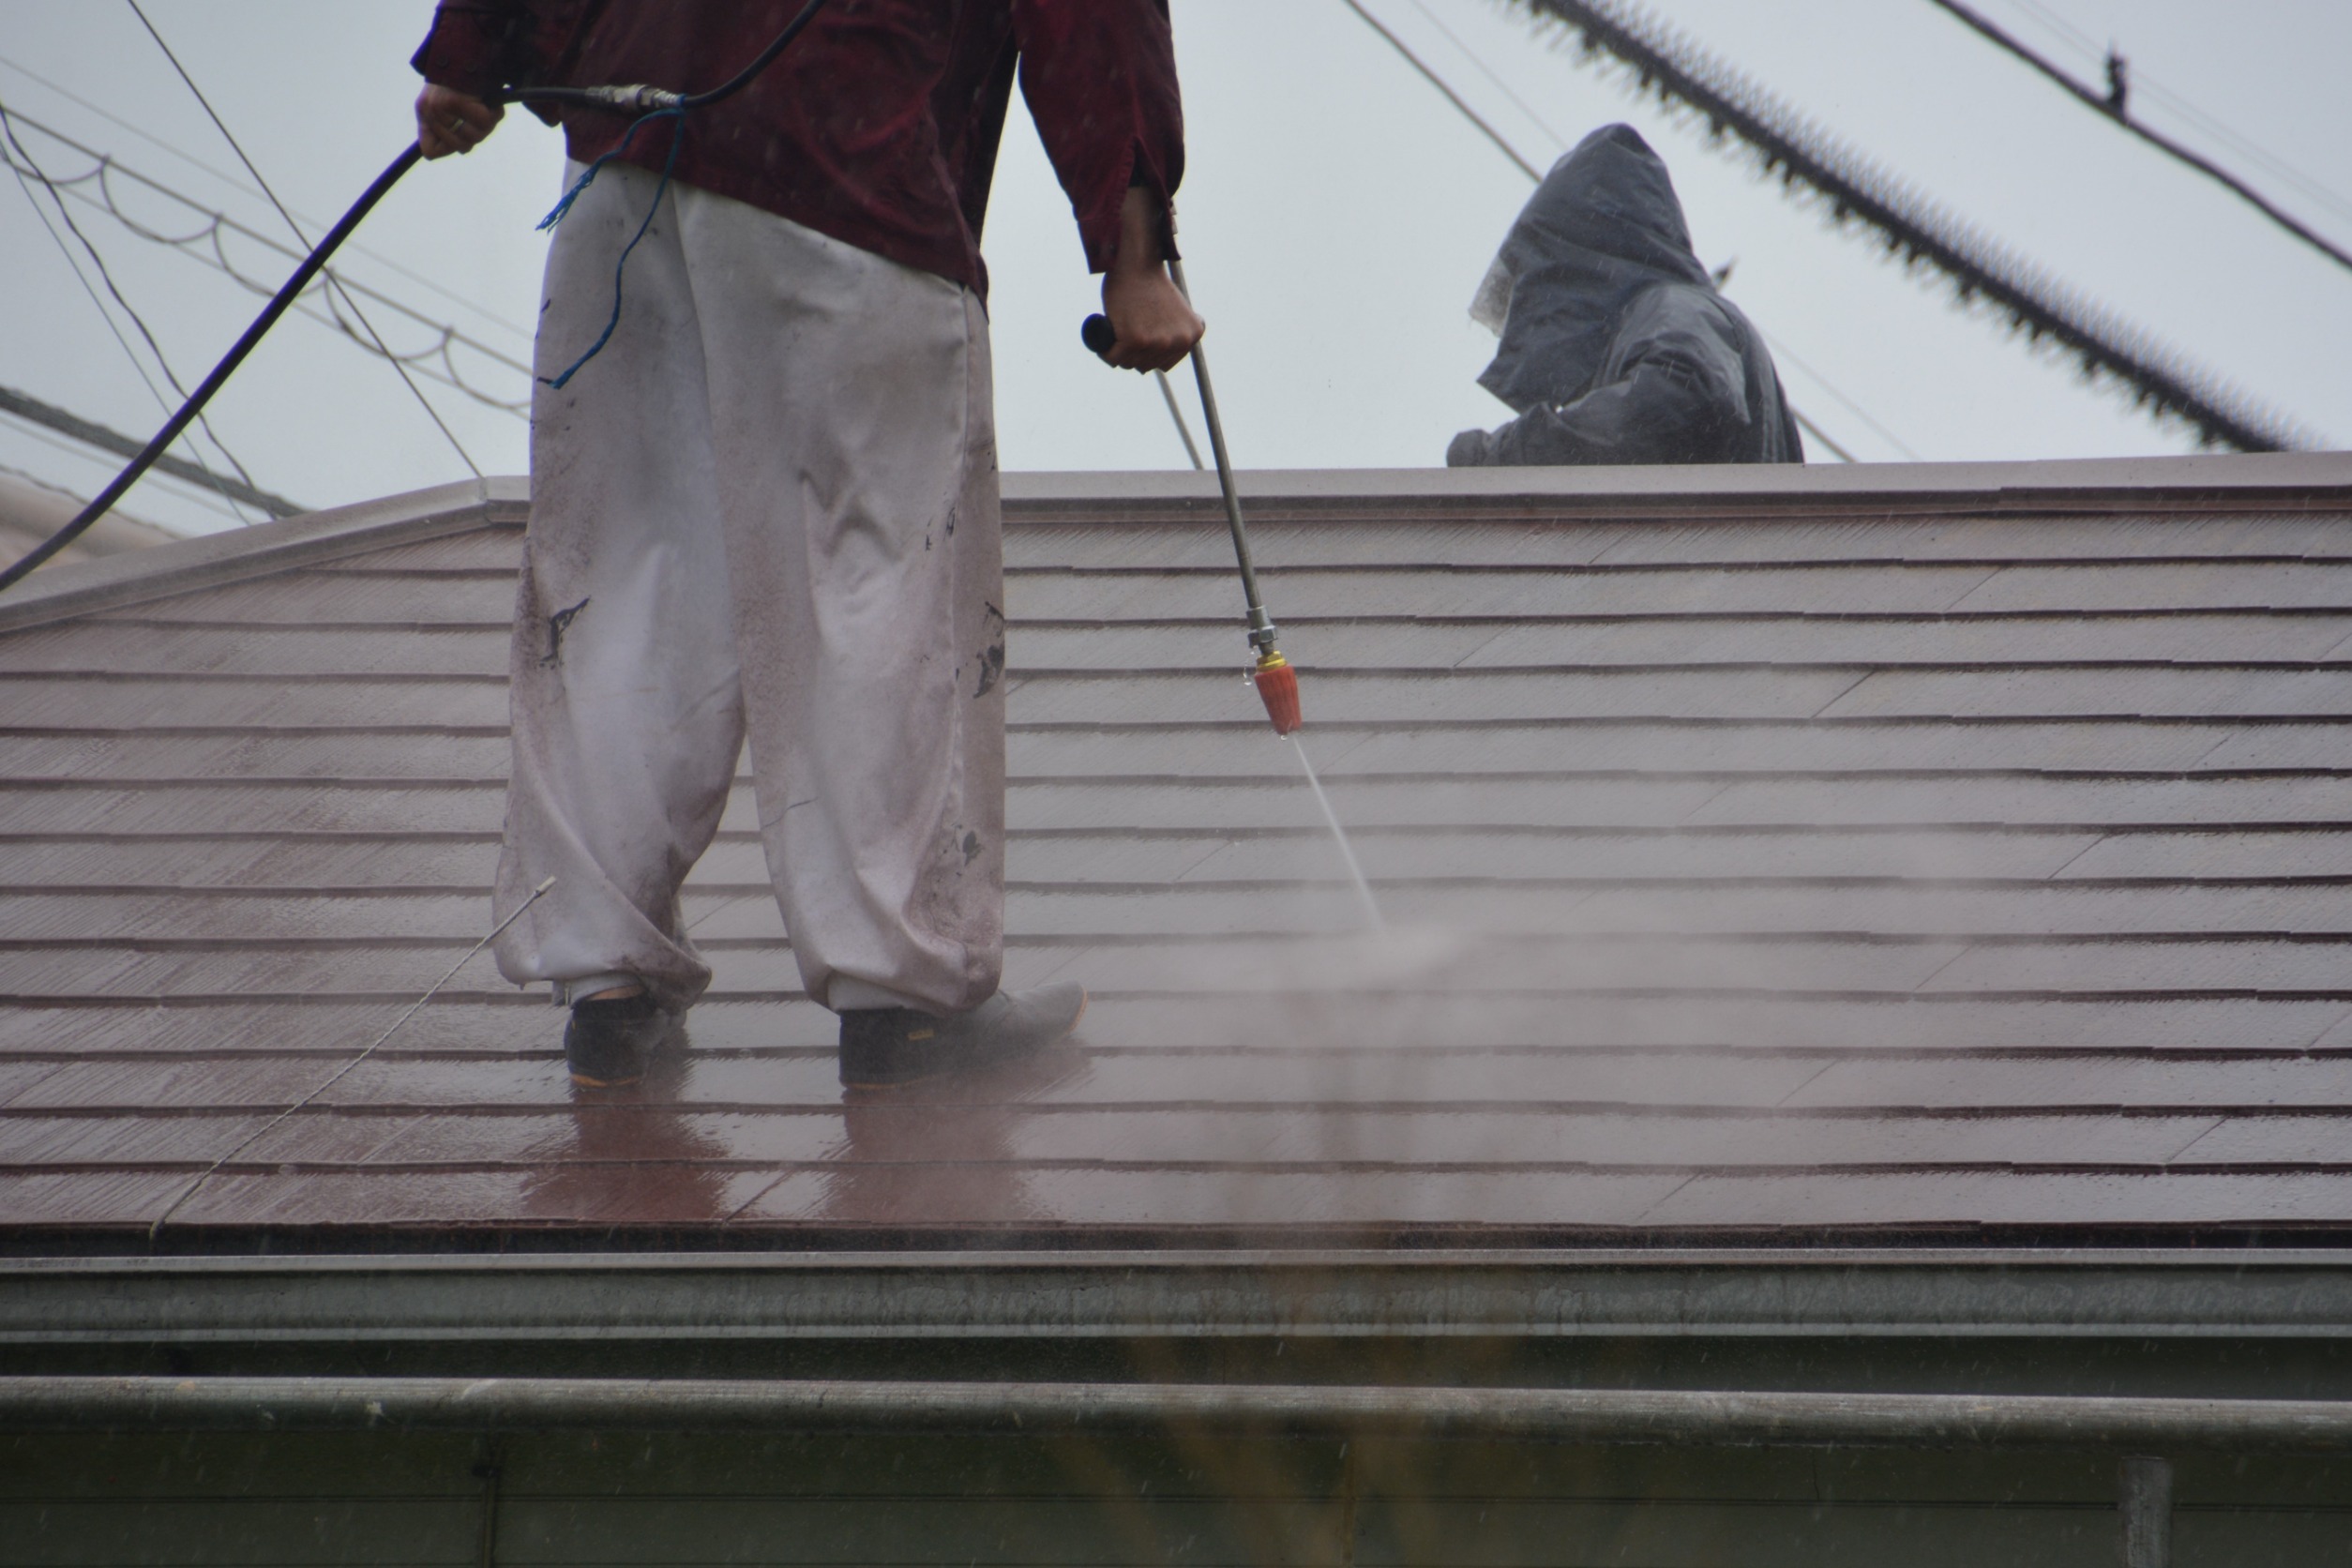 Pressure Washing Your Roof